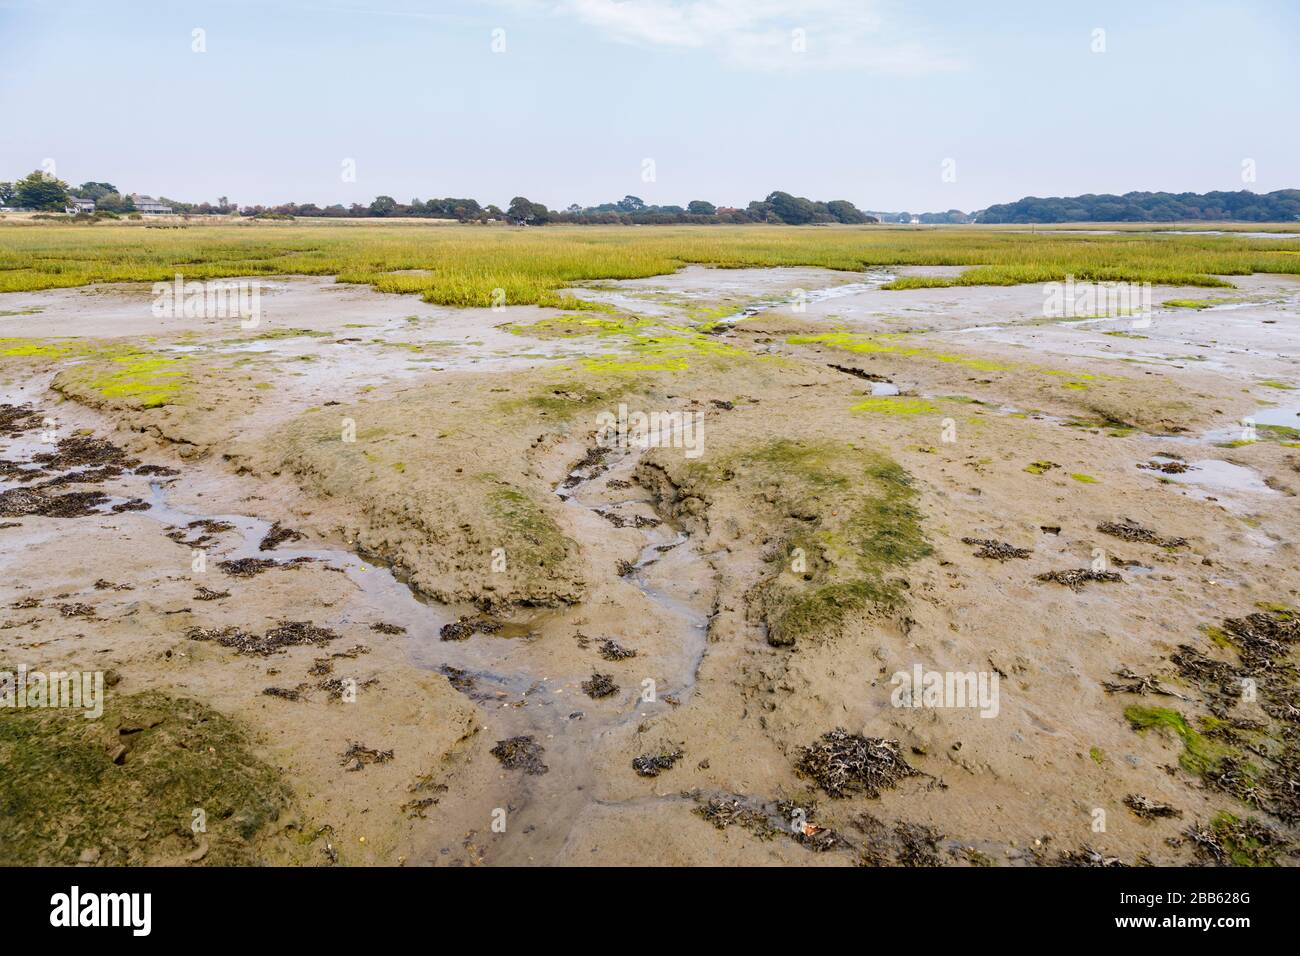 Smugglers Lane and Ferry Hard inter-tidal saltmarsh areas at low tide, Bosham, a small village in Chichester Harbour, West Sussex, south coast England Stock Photo